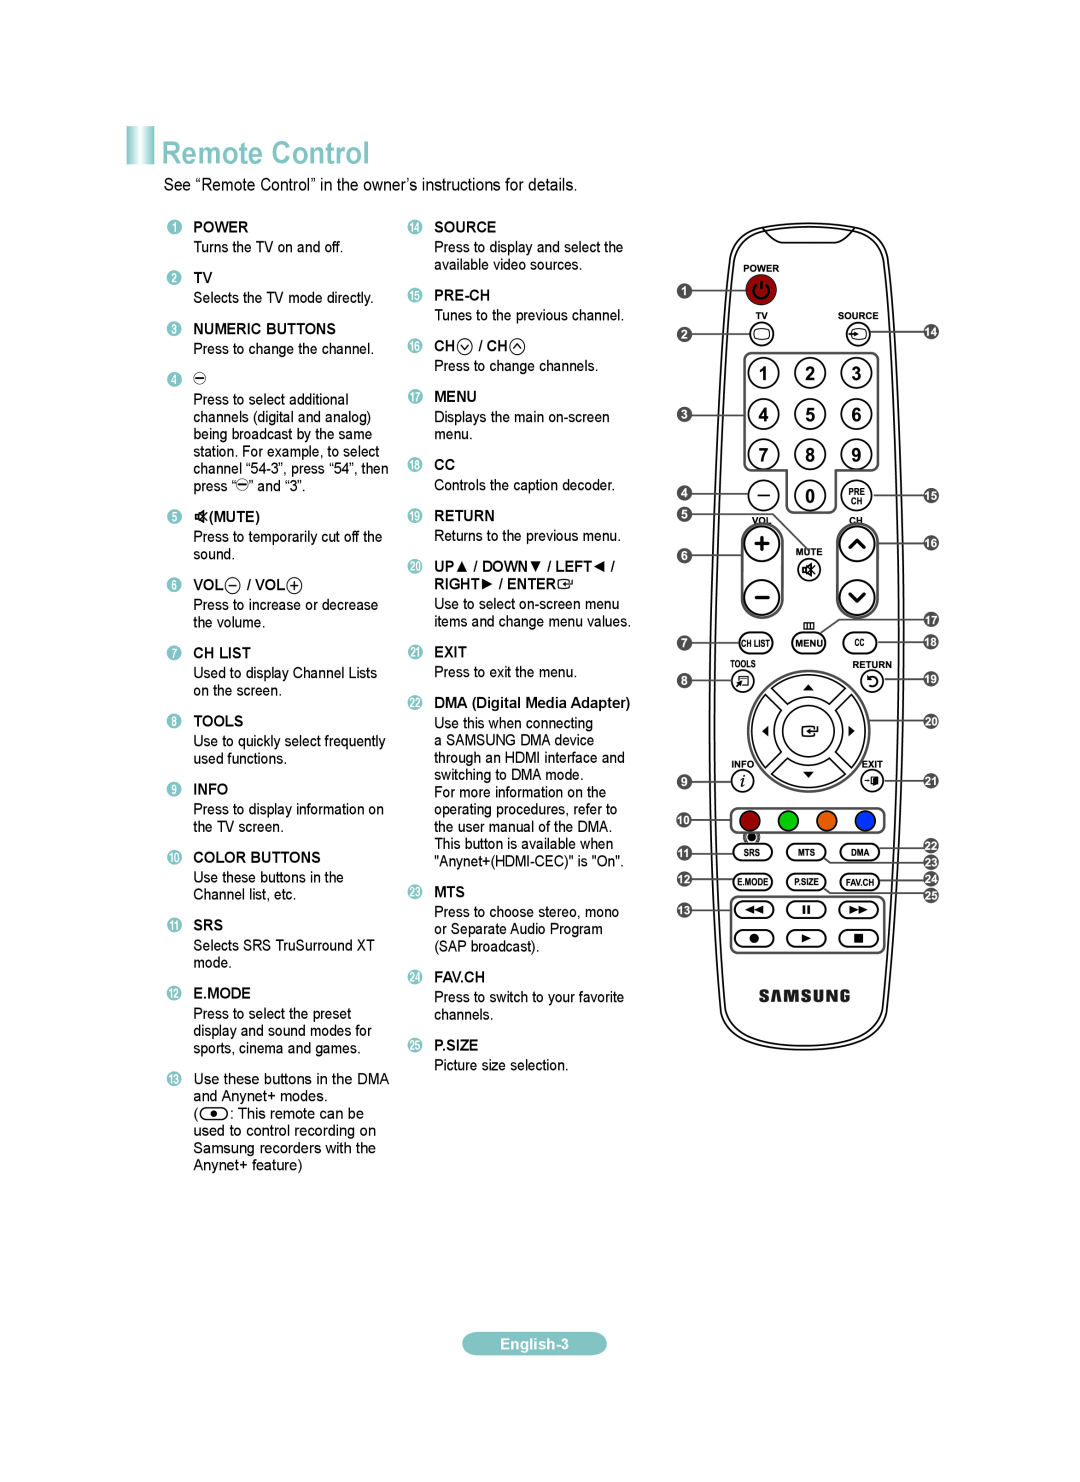 Samsung LN37A450CD, LN32A450CD, LN26A450CD manual See “Remote Control” in the owner’s instructions for details, English 